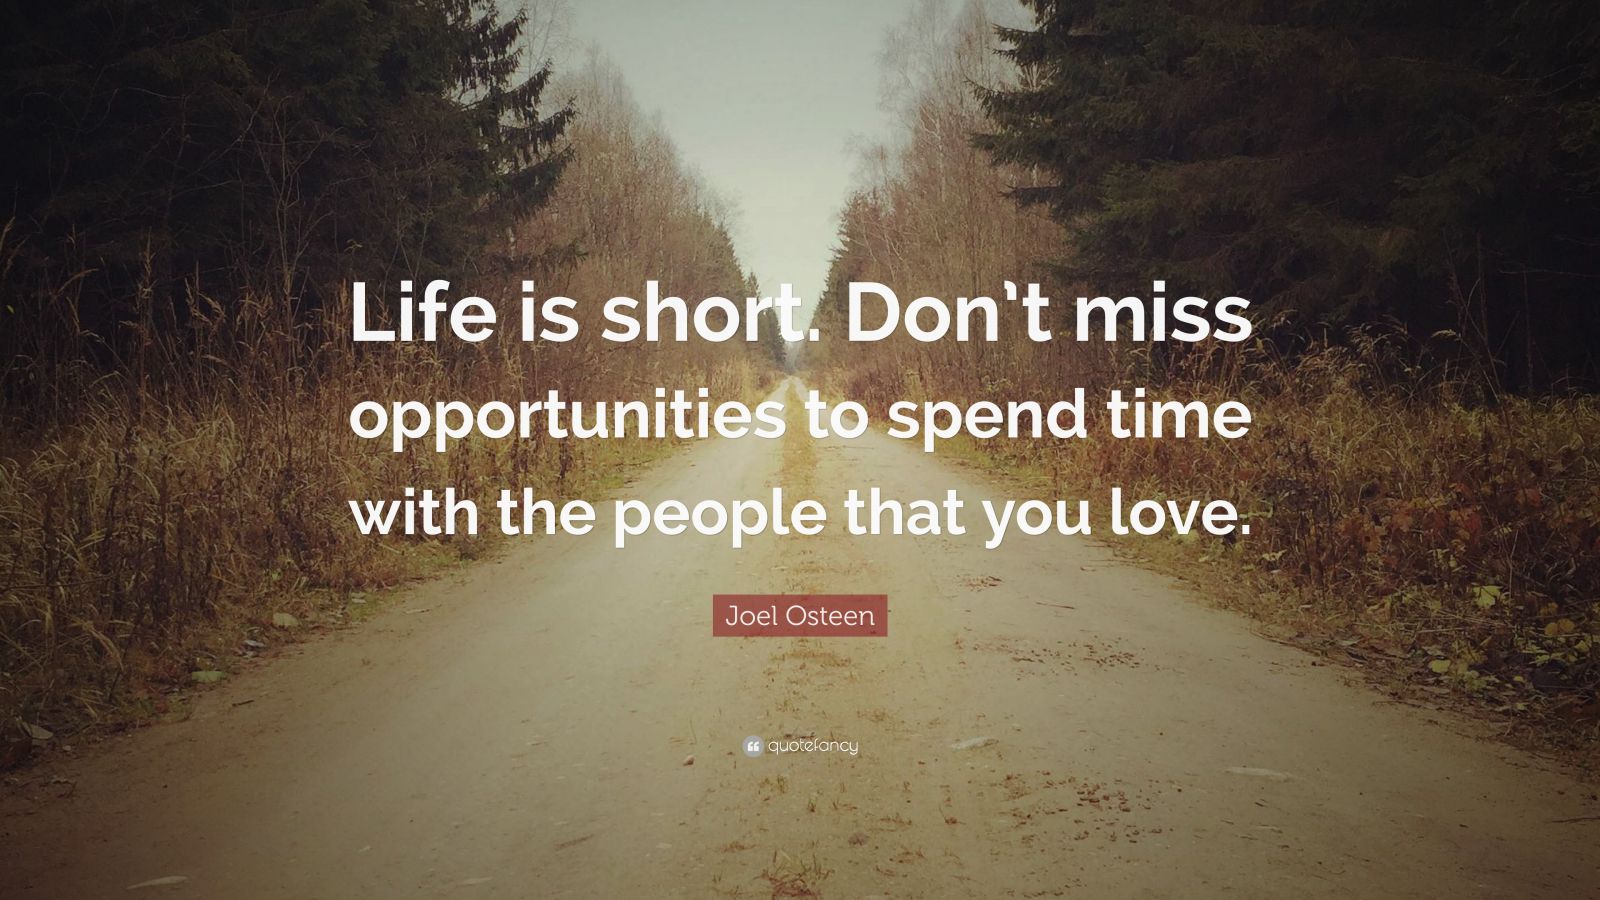 Joel Osteen Quote: “Life is short. Don’t miss opportunities to spend ...